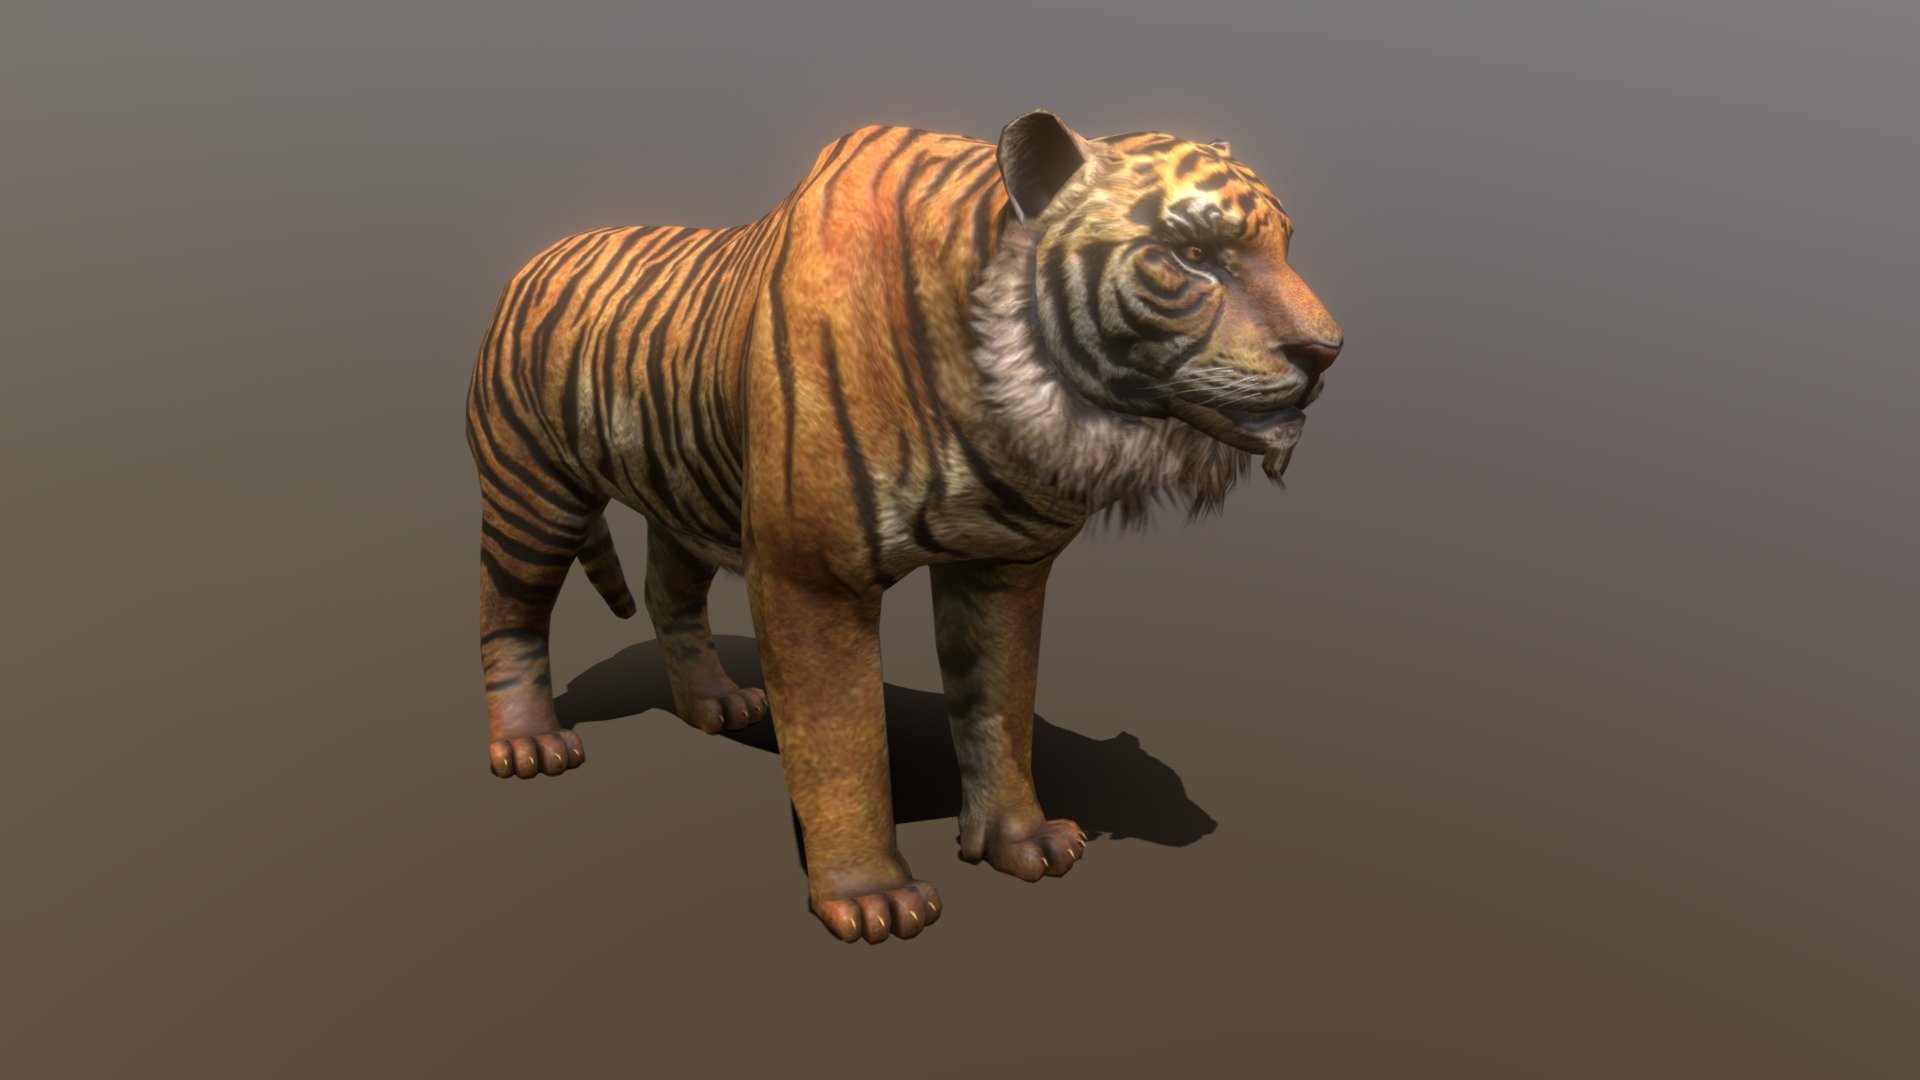 Realistic Tiger 3D Model:


Lowpoly (Tris: 4648- Verts: 2513)
Game ready with Unity Package, optimized for VR/AR apps
Texture Maps includes: Basecolor, Opacity, Basecolor with Alpha, Normal
Model is created in Maya, other files supported includes: Blender, FBX, Glb/Gltf, Unity

10 animations:
- 5-64: idle
- 70-99: walk
- 105-124:run
- 130-159: jump
- 165-194: jump and attack
- 200-224: bite
- 230-279: roar
- 285-324: combo claws attack
- 330-349: get hit
- 355-500: death - Lowpoly Tiger Rigged and Animated for VR AR - Buy Royalty Free 3D model by Dzung Dinh (@hugechimera) 3d model